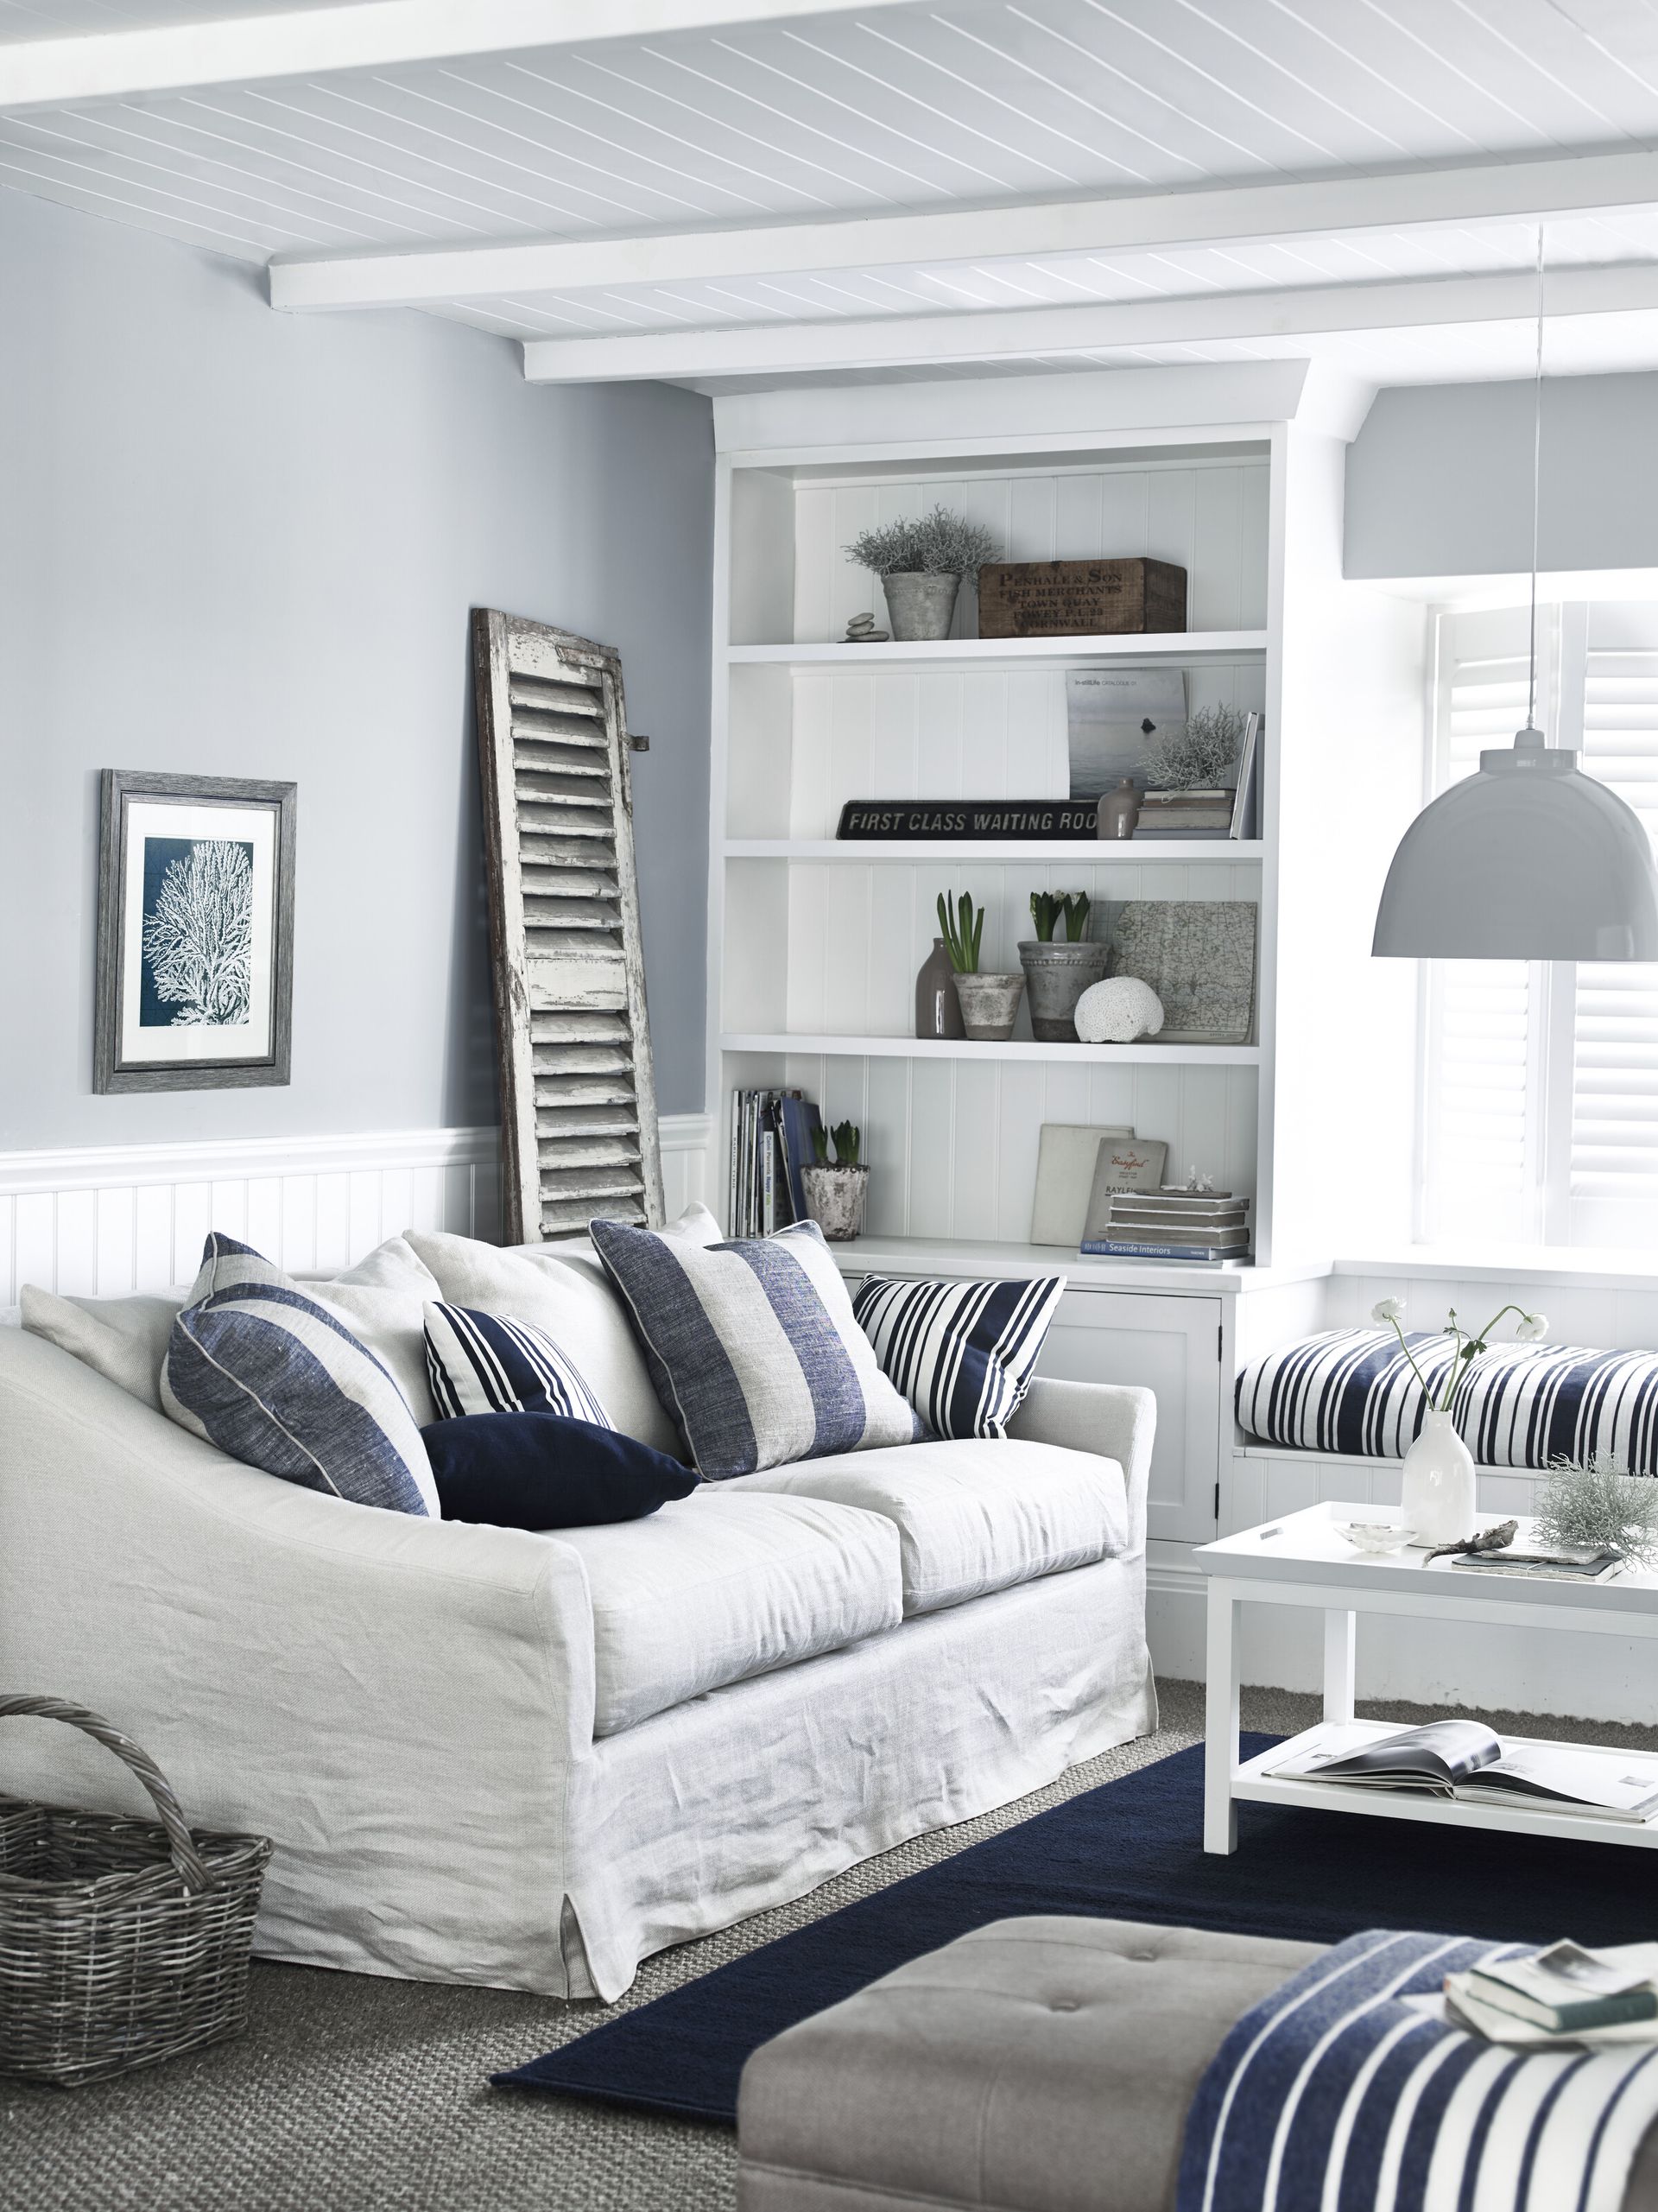 10 alcove shelf ideas: chic design options and styling strategies